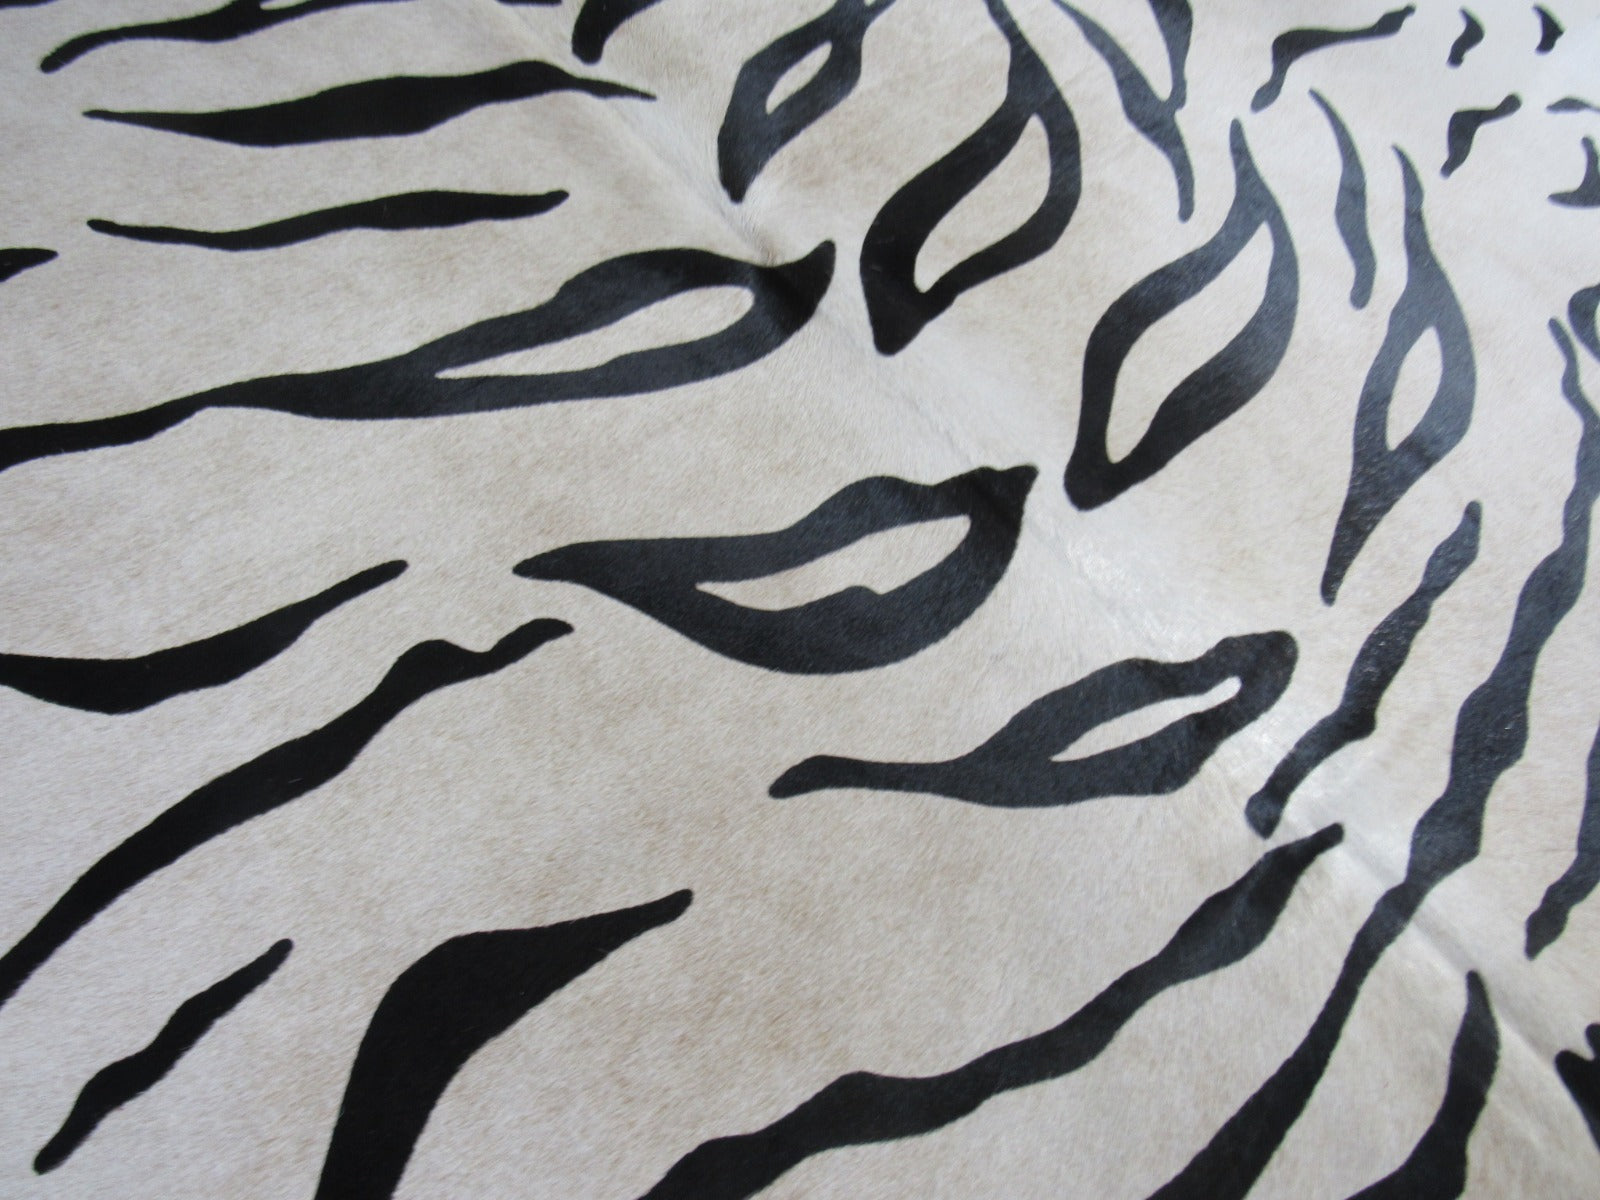 Tiger Print Cowhide Rug on Light Beige Background (fire brand) Size: 6.7x6.7 feet C-1684